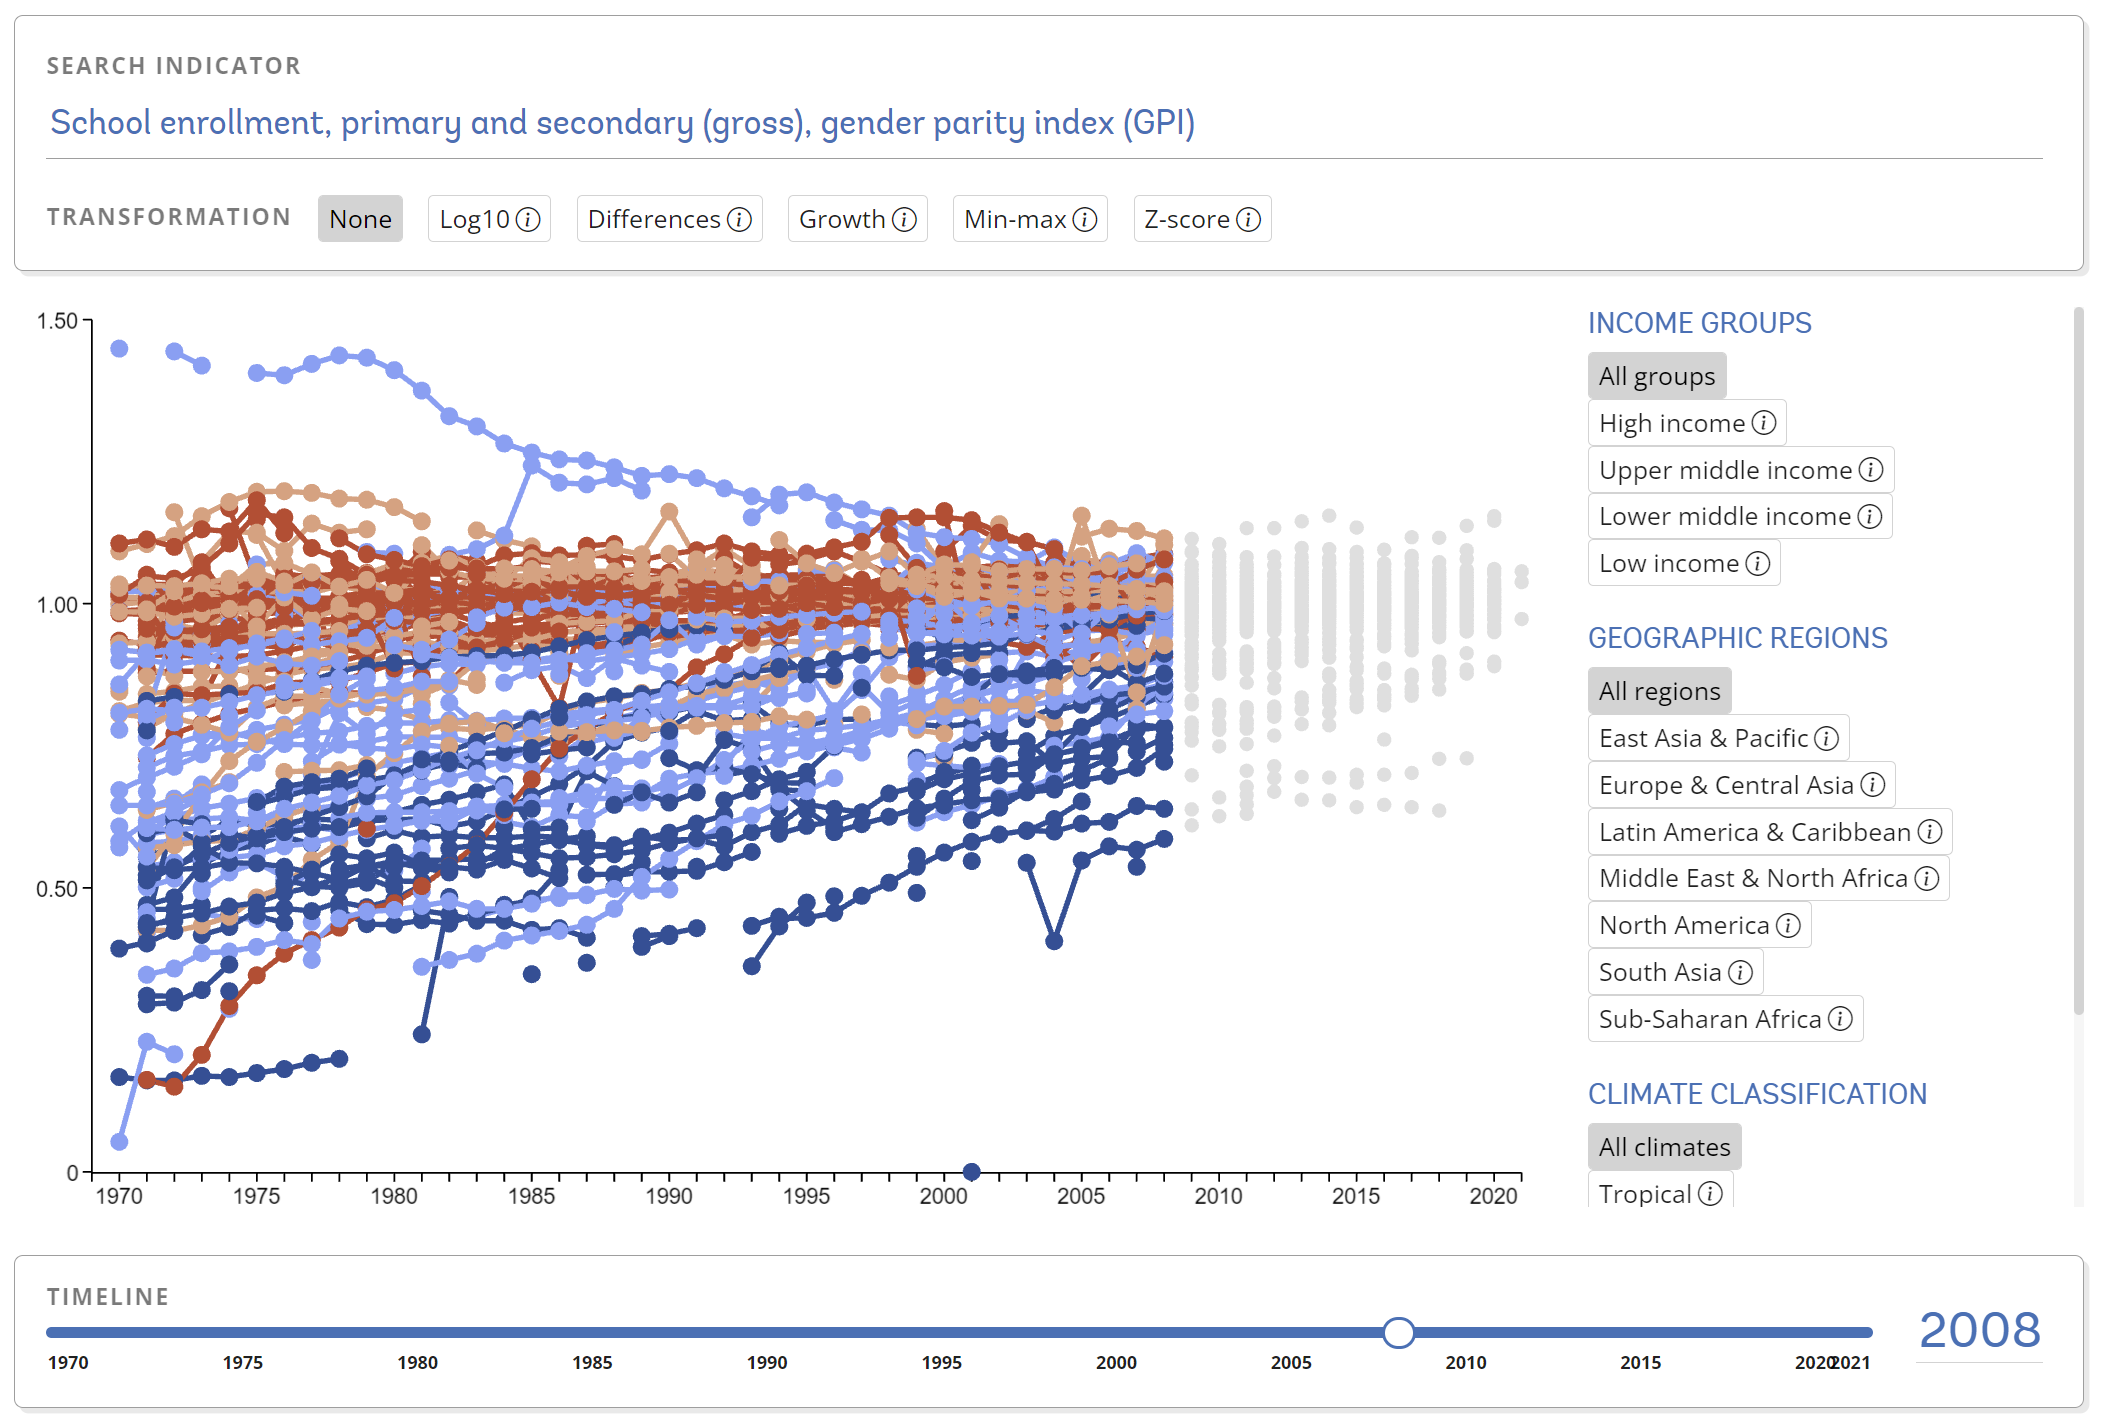 Snapshot of the indicator page thats shows the time series of primary and secondary school enrollment.